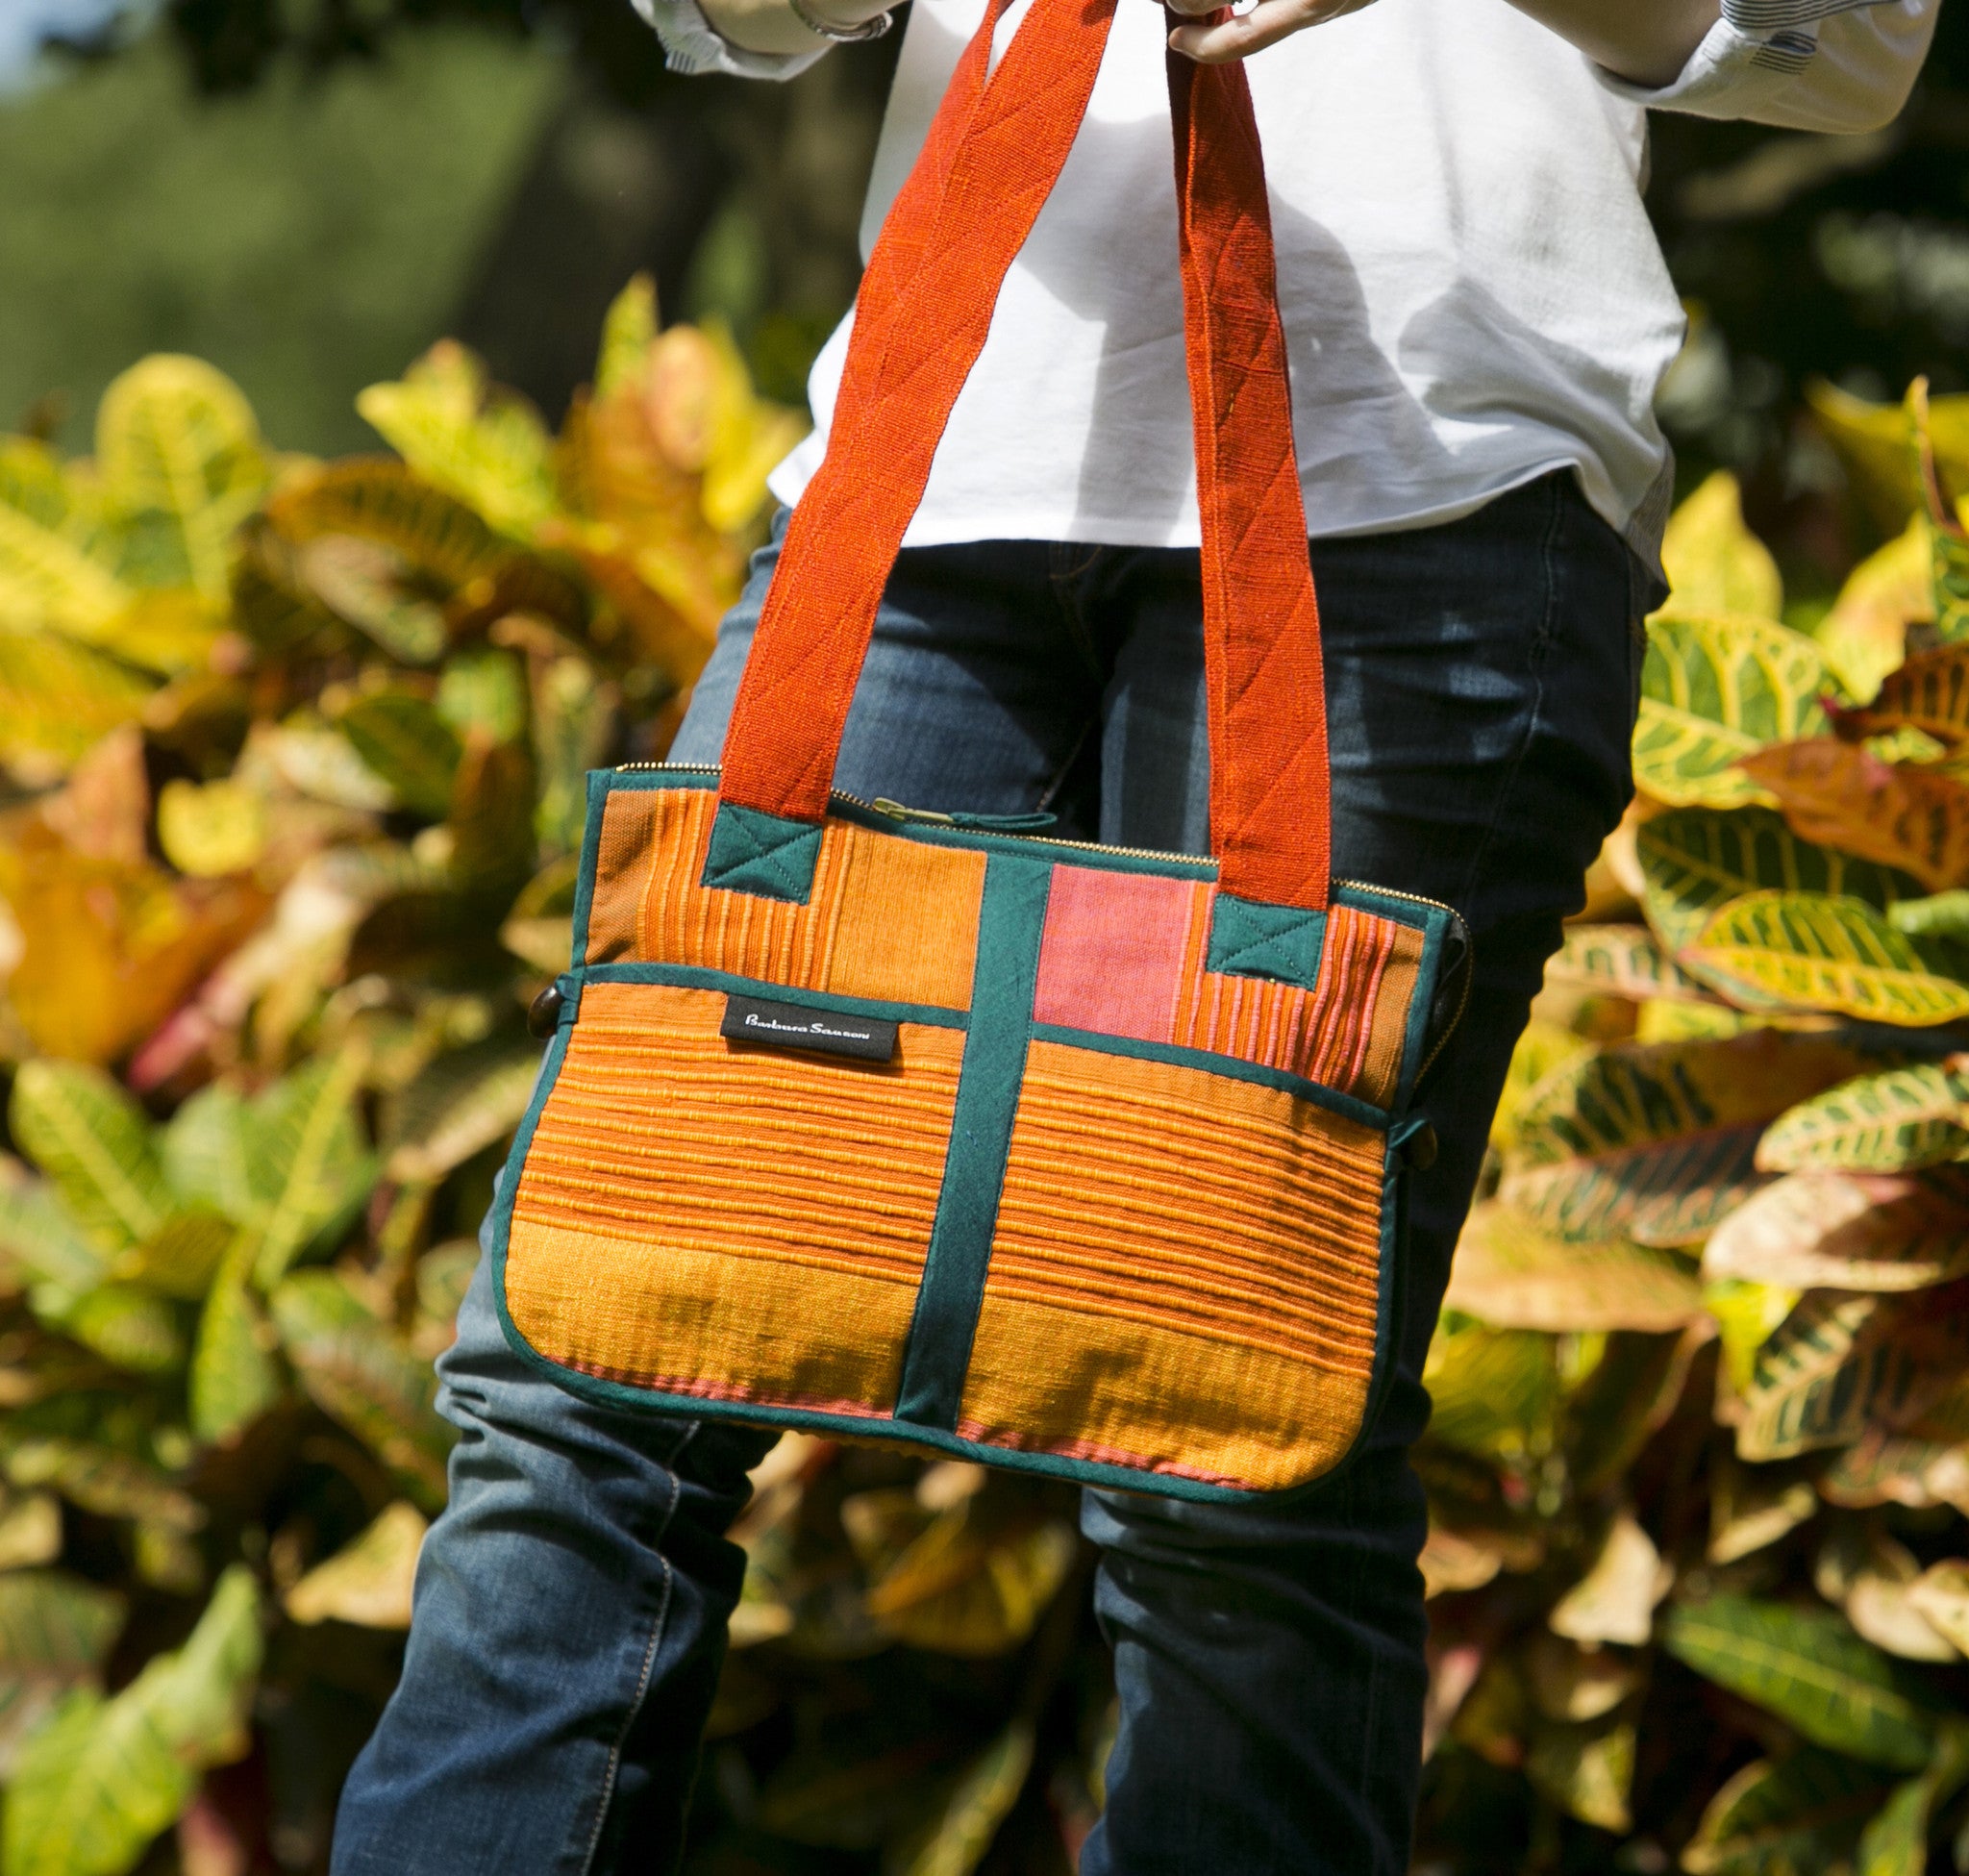 Barefoot Handwoven Expandable Shoulder Bag – spacious and stylish! (sample fabric shown)